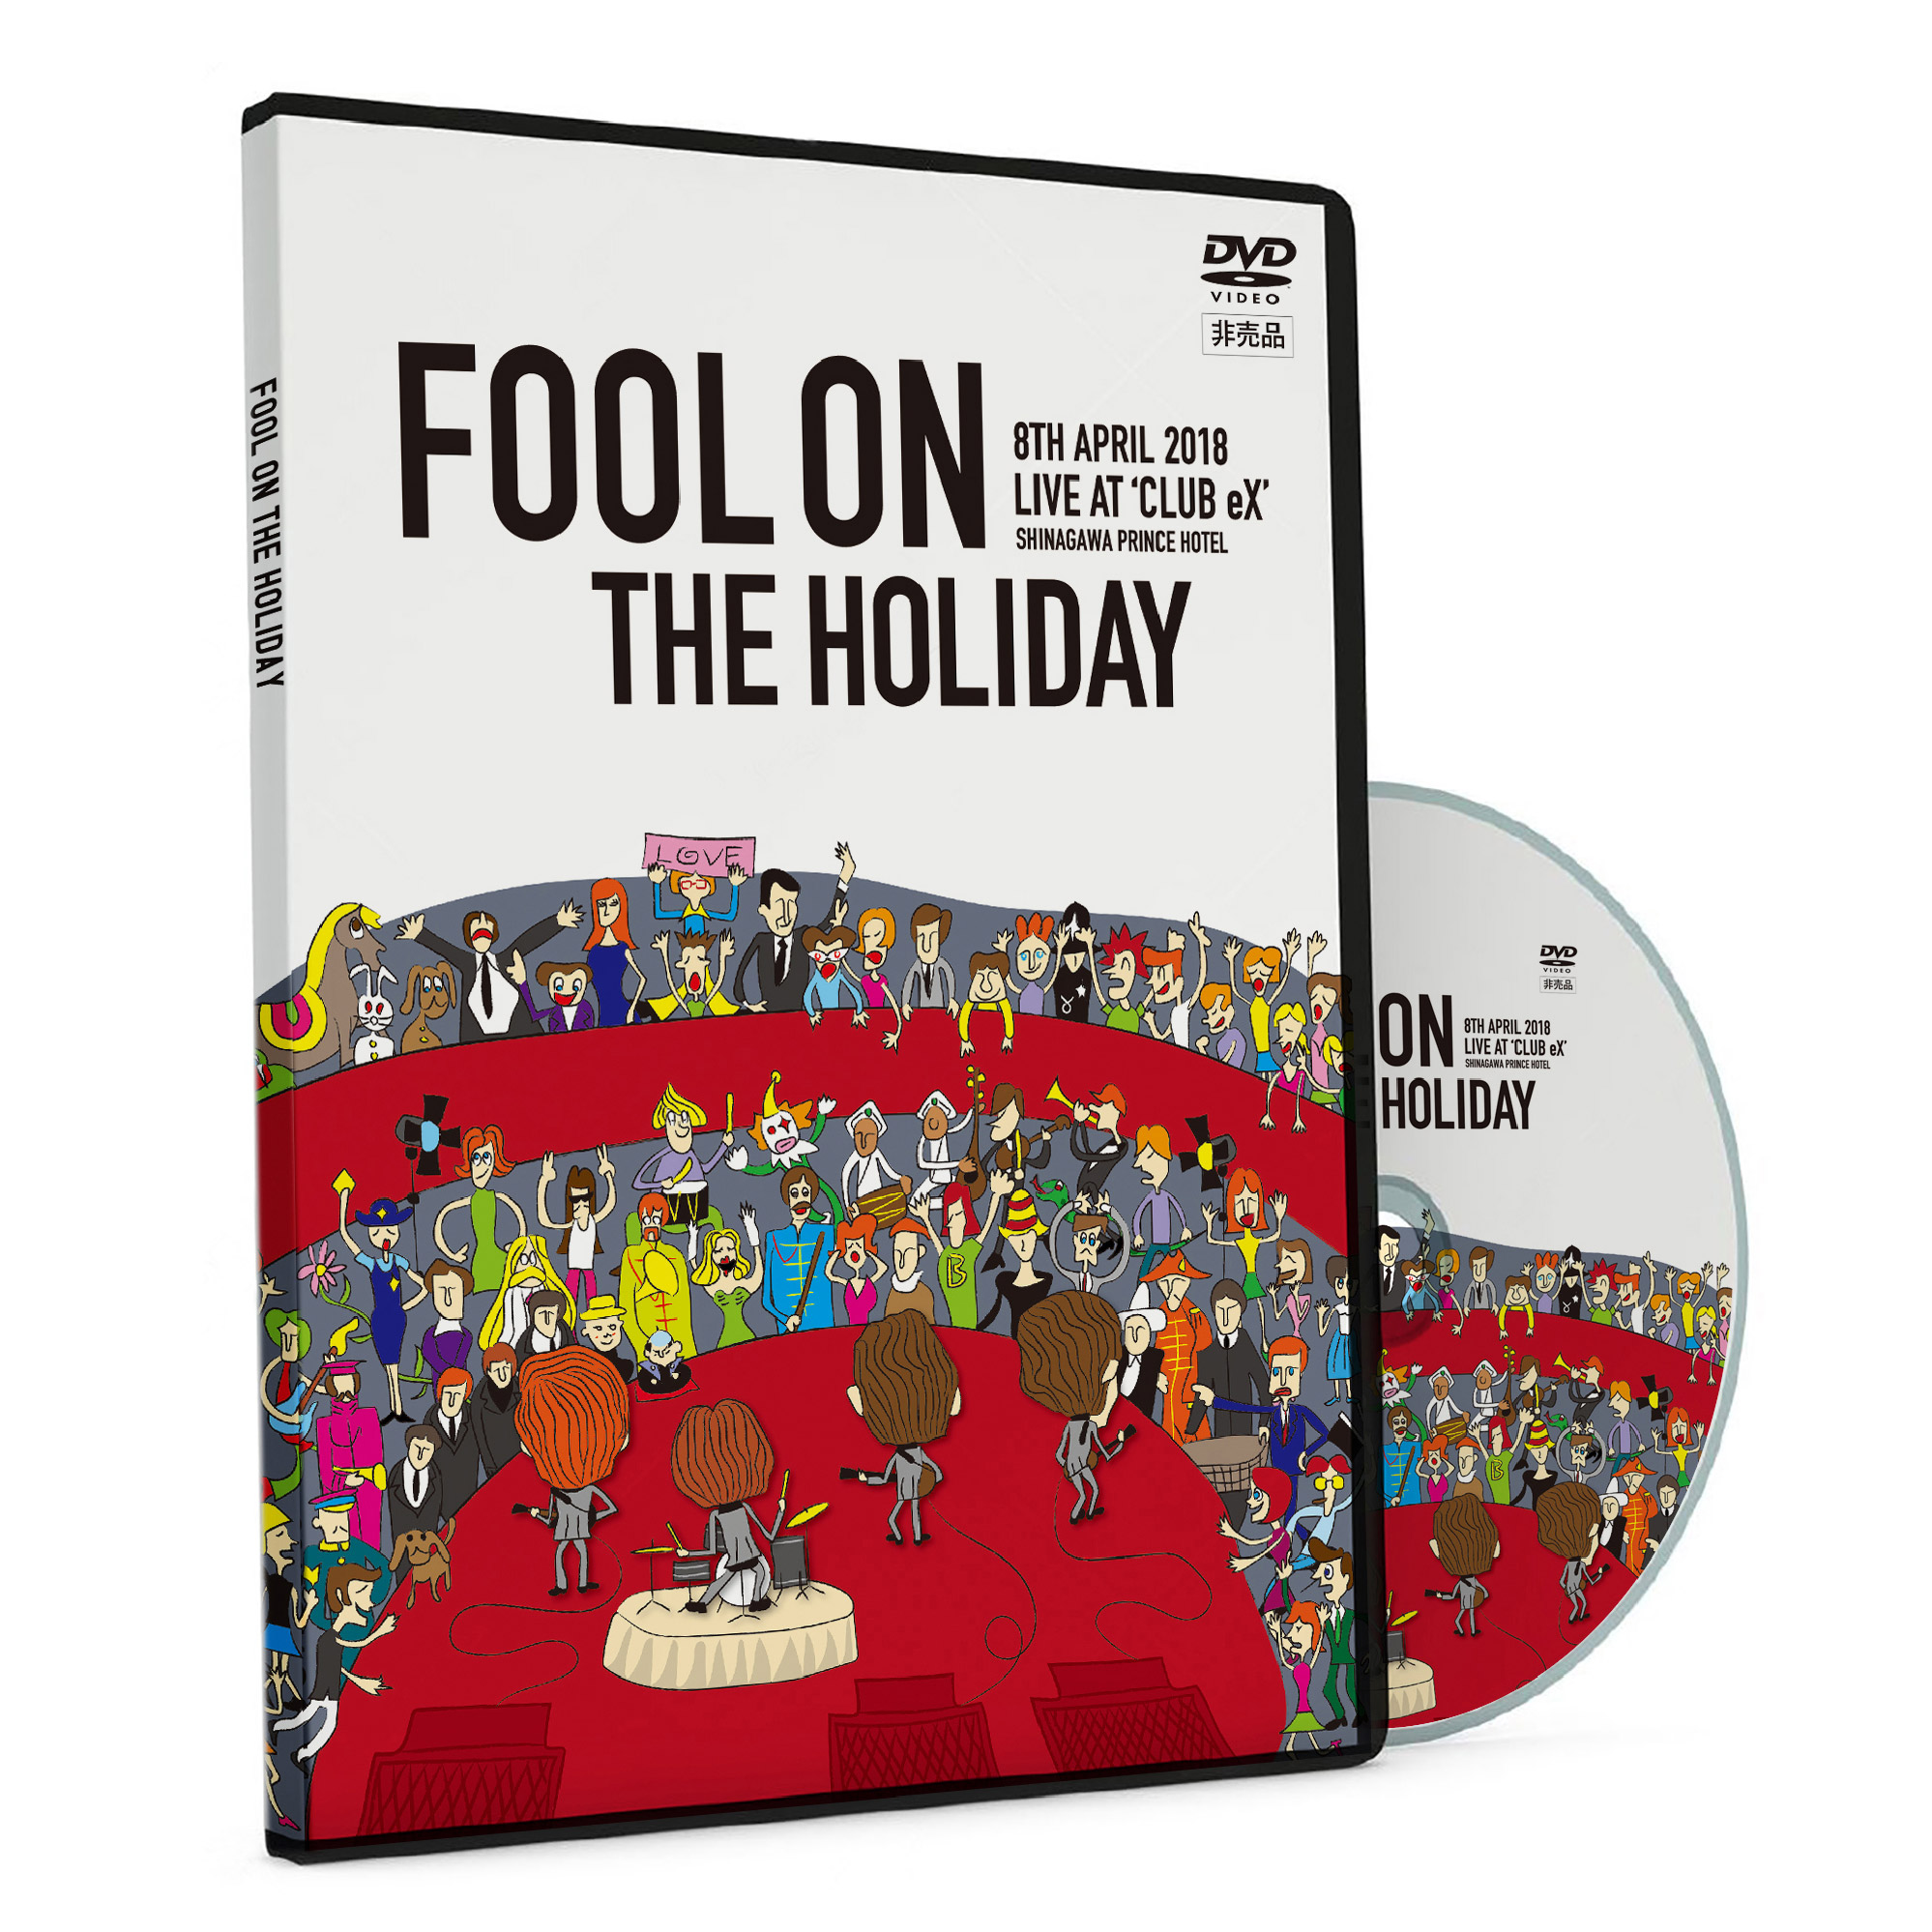 Fool On The Holiday